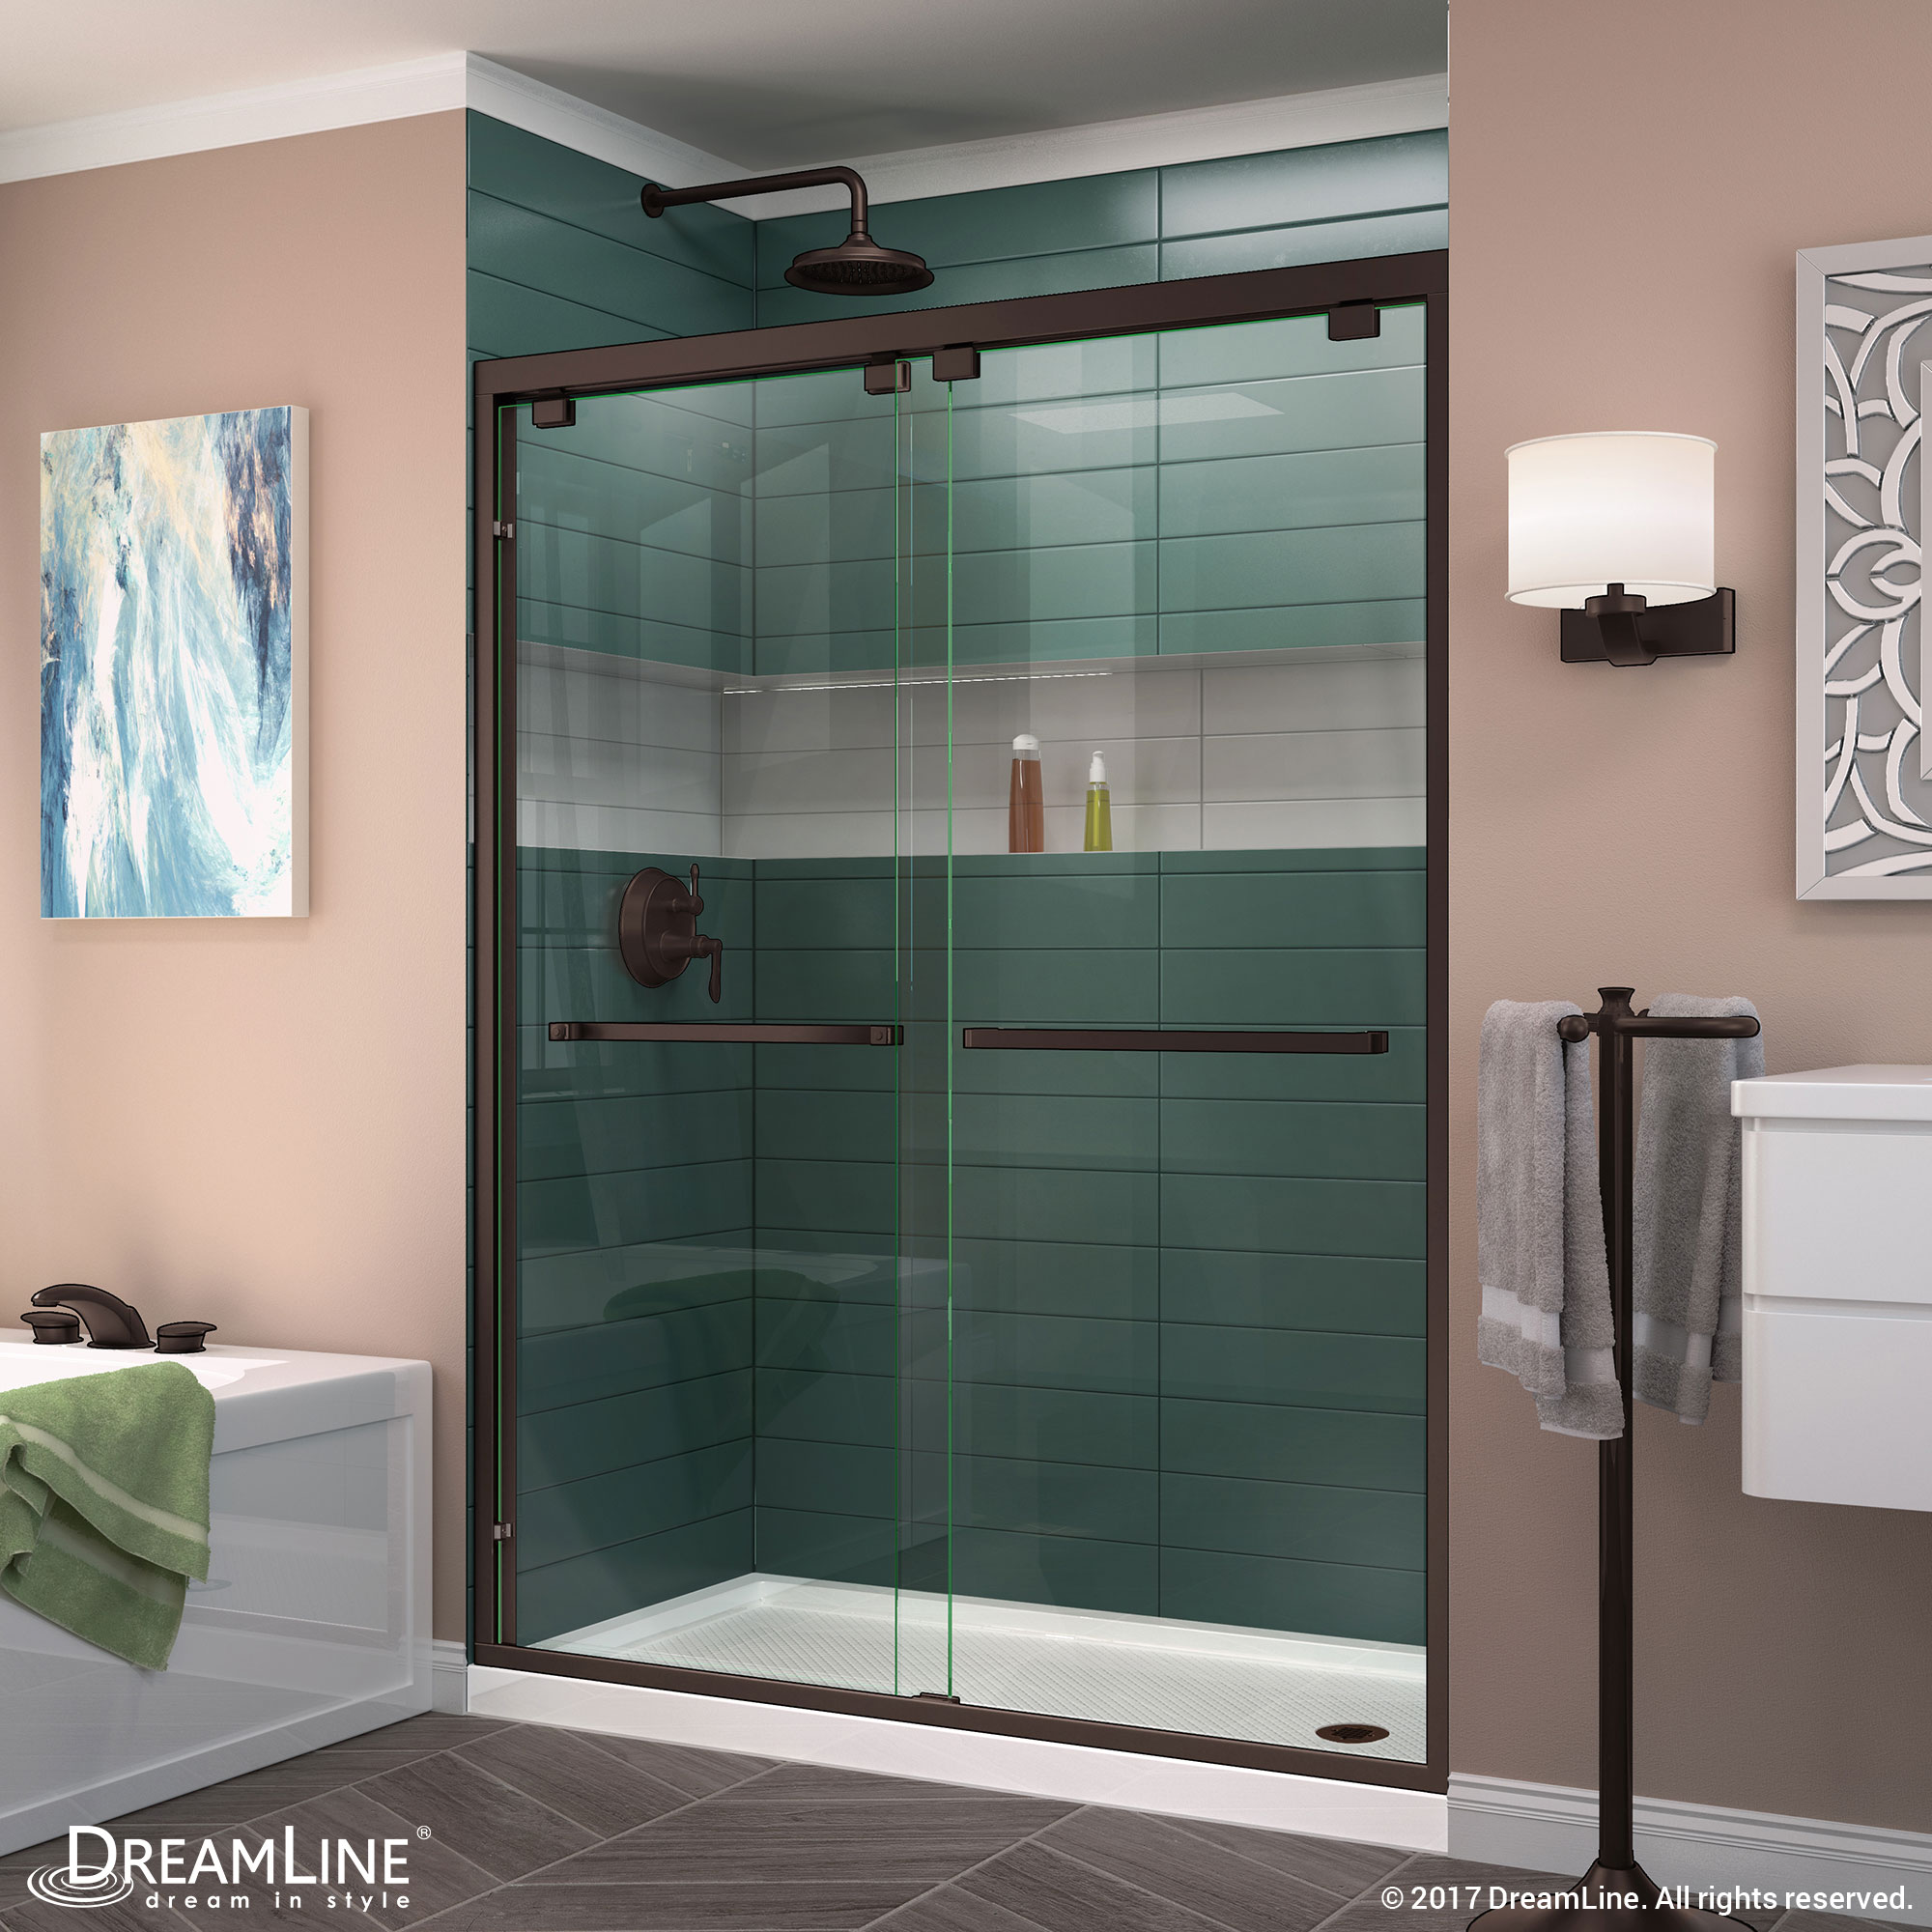 DreamLine Encore 34 in. D x 60 in. W x 78 3/4 in. H Bypass Shower Door in Chrome and Center Drain Biscuit Base Kit